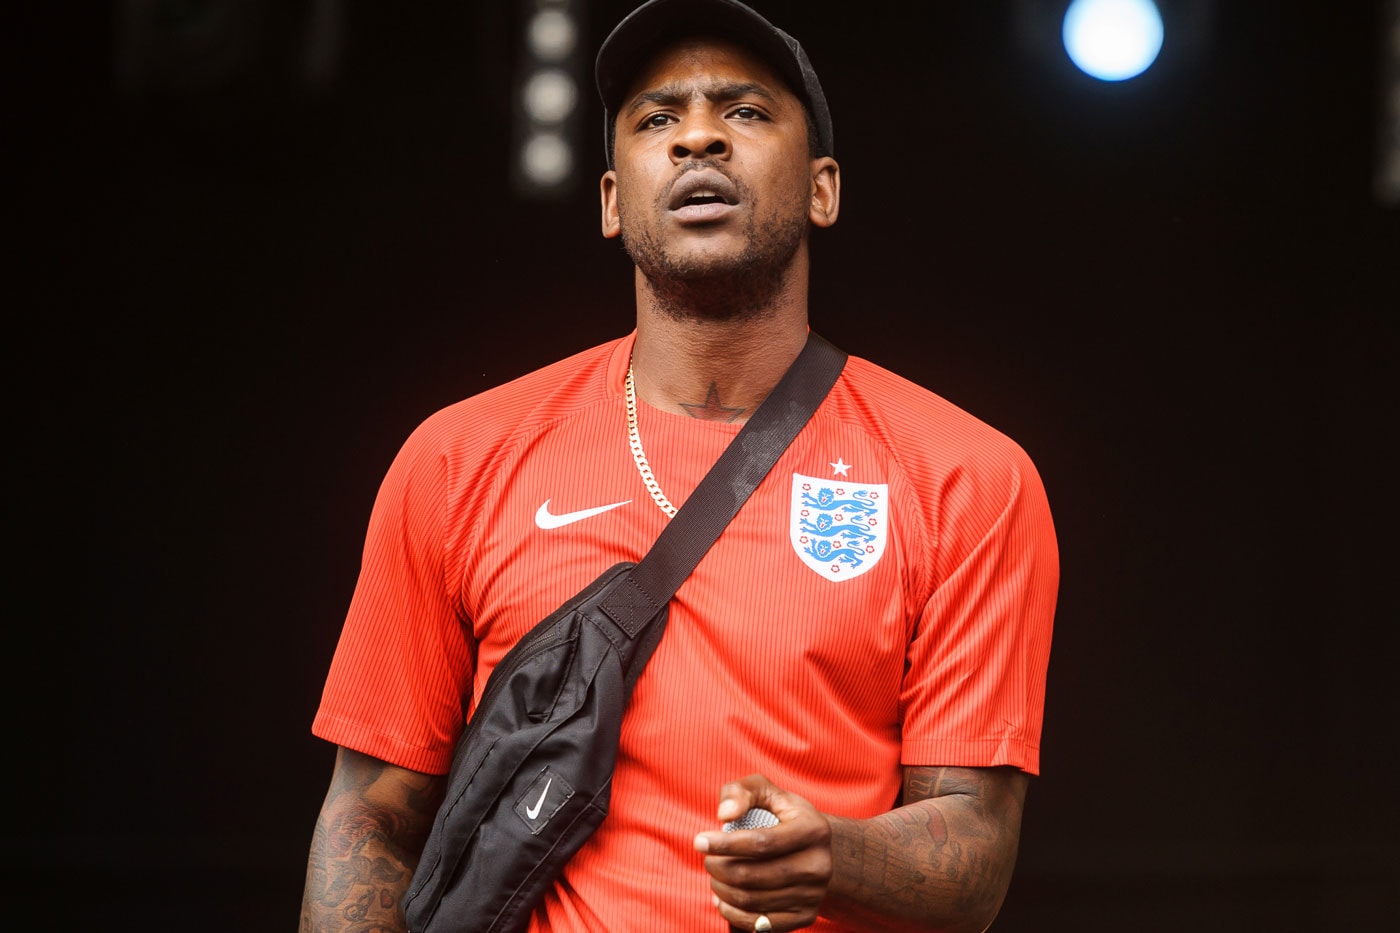 Chasing Moments: A Conversation With Skepta